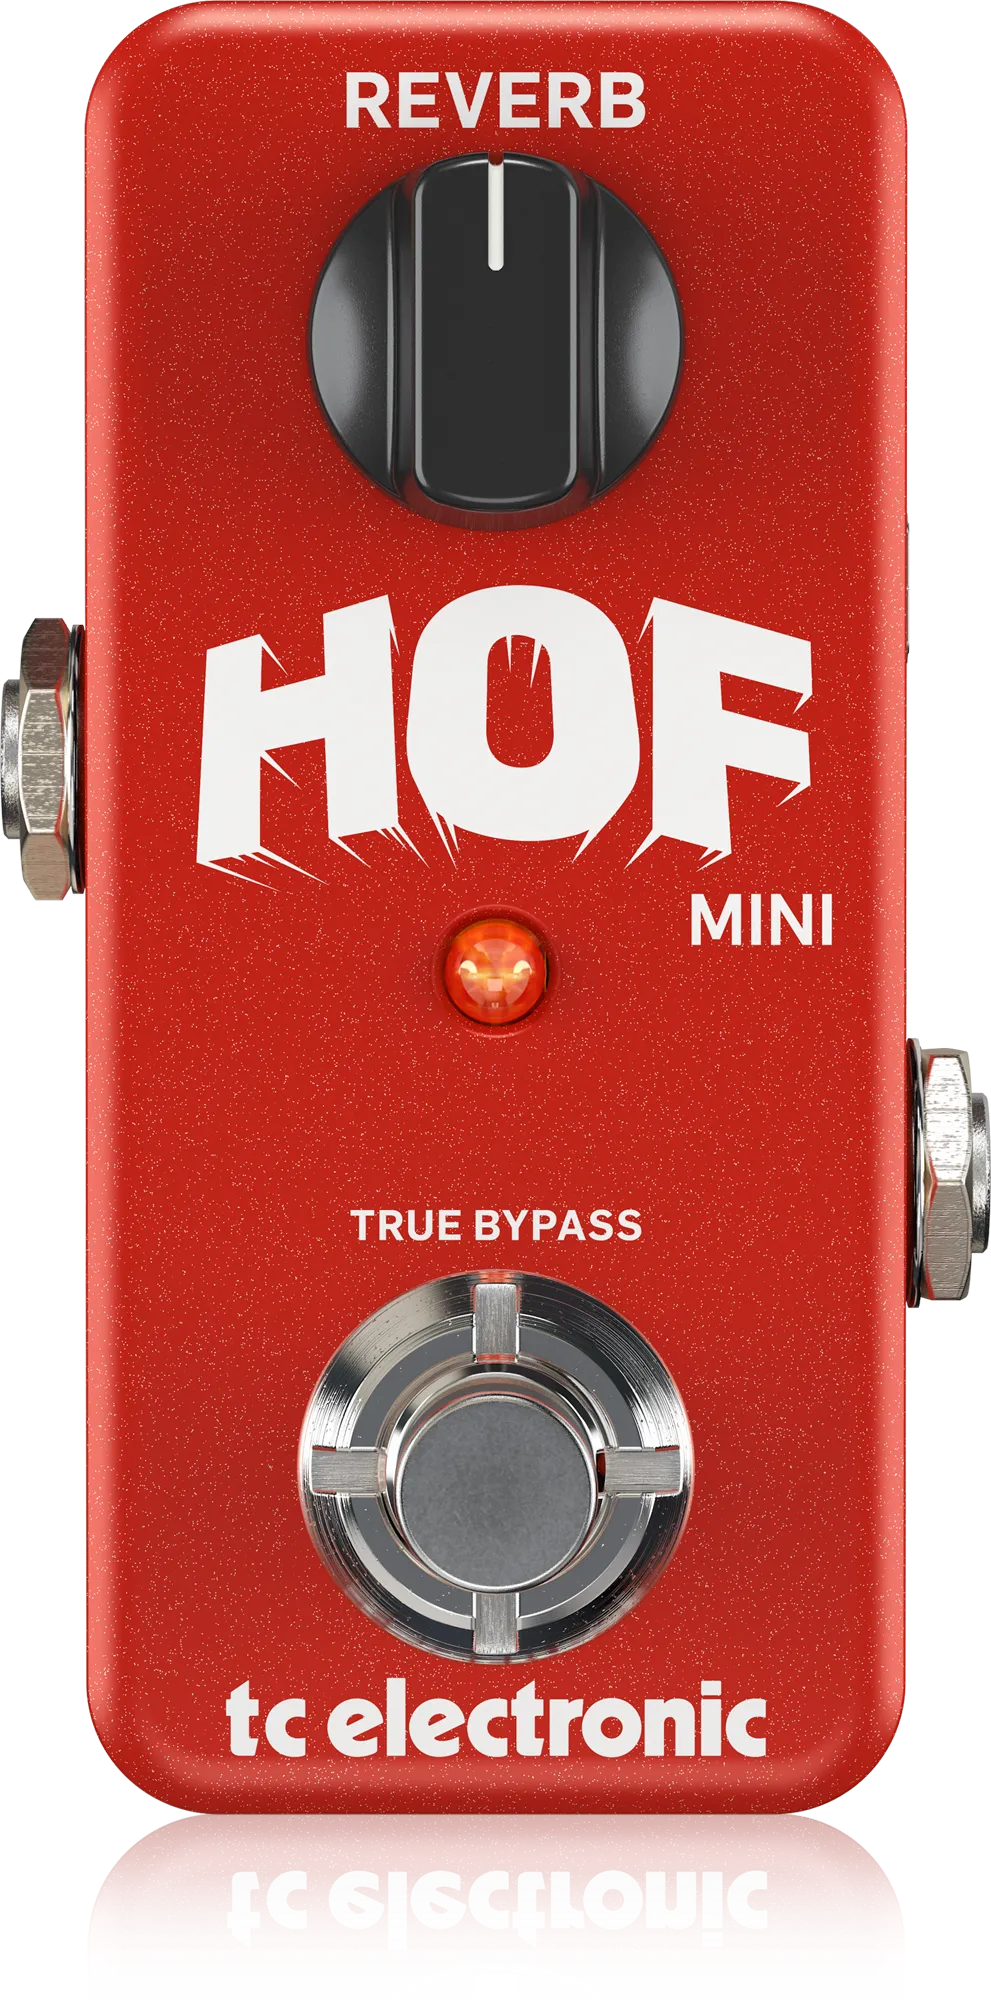 Hall of Fame Mini Reverb Guitar Pedal By TC Electronic